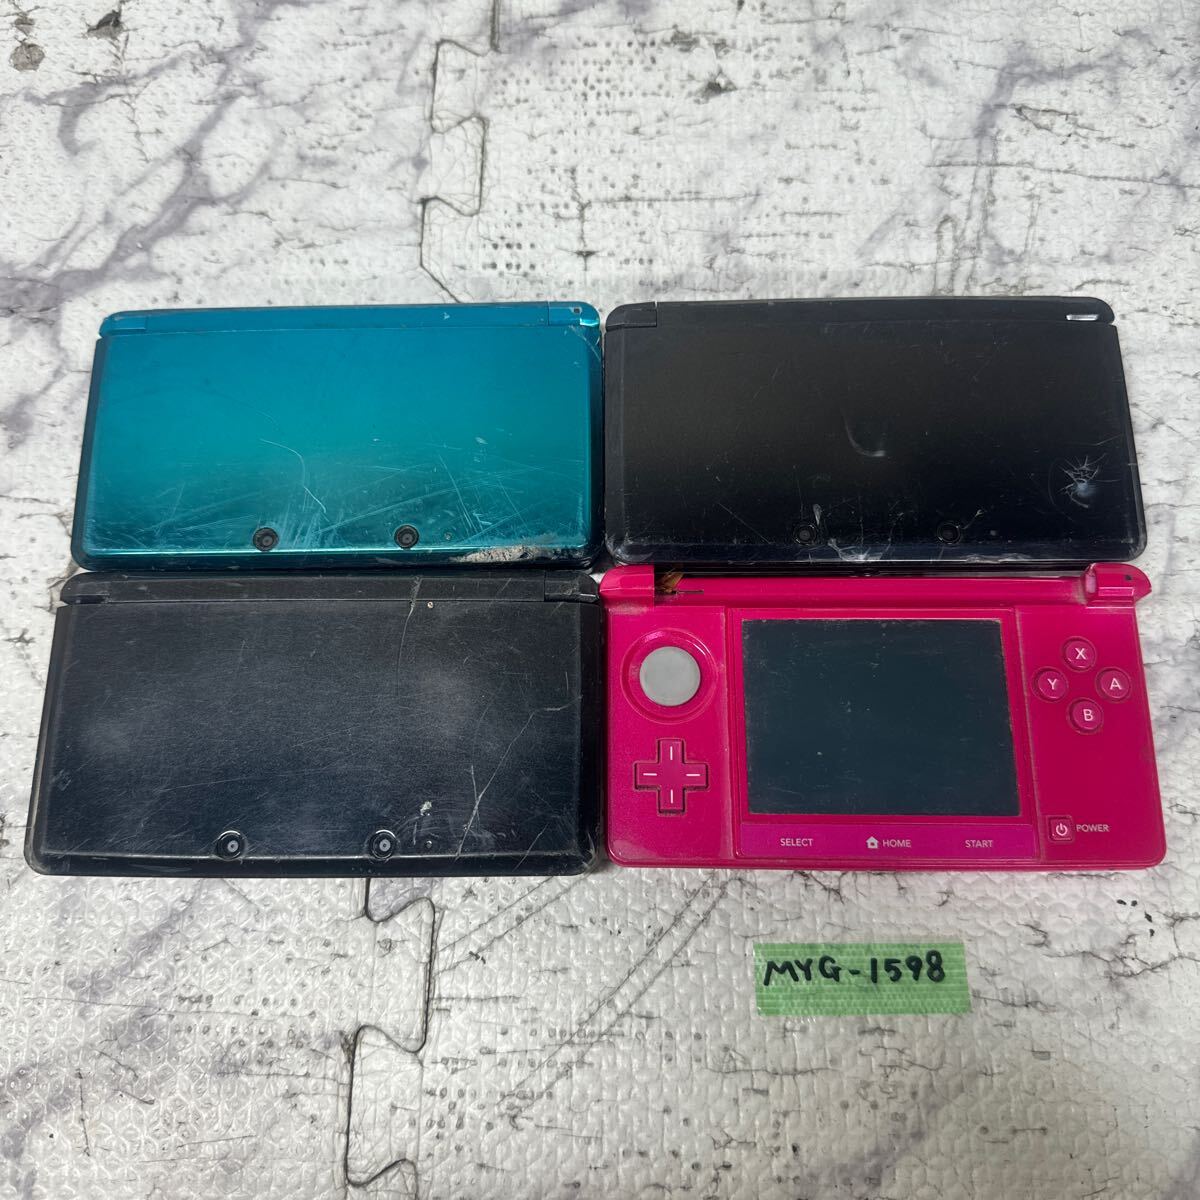 MYG-1598 super-discount ge-. machine body Nintendo 3DS operation not yet verification 4 point set sale Junk including in a package un- possible 